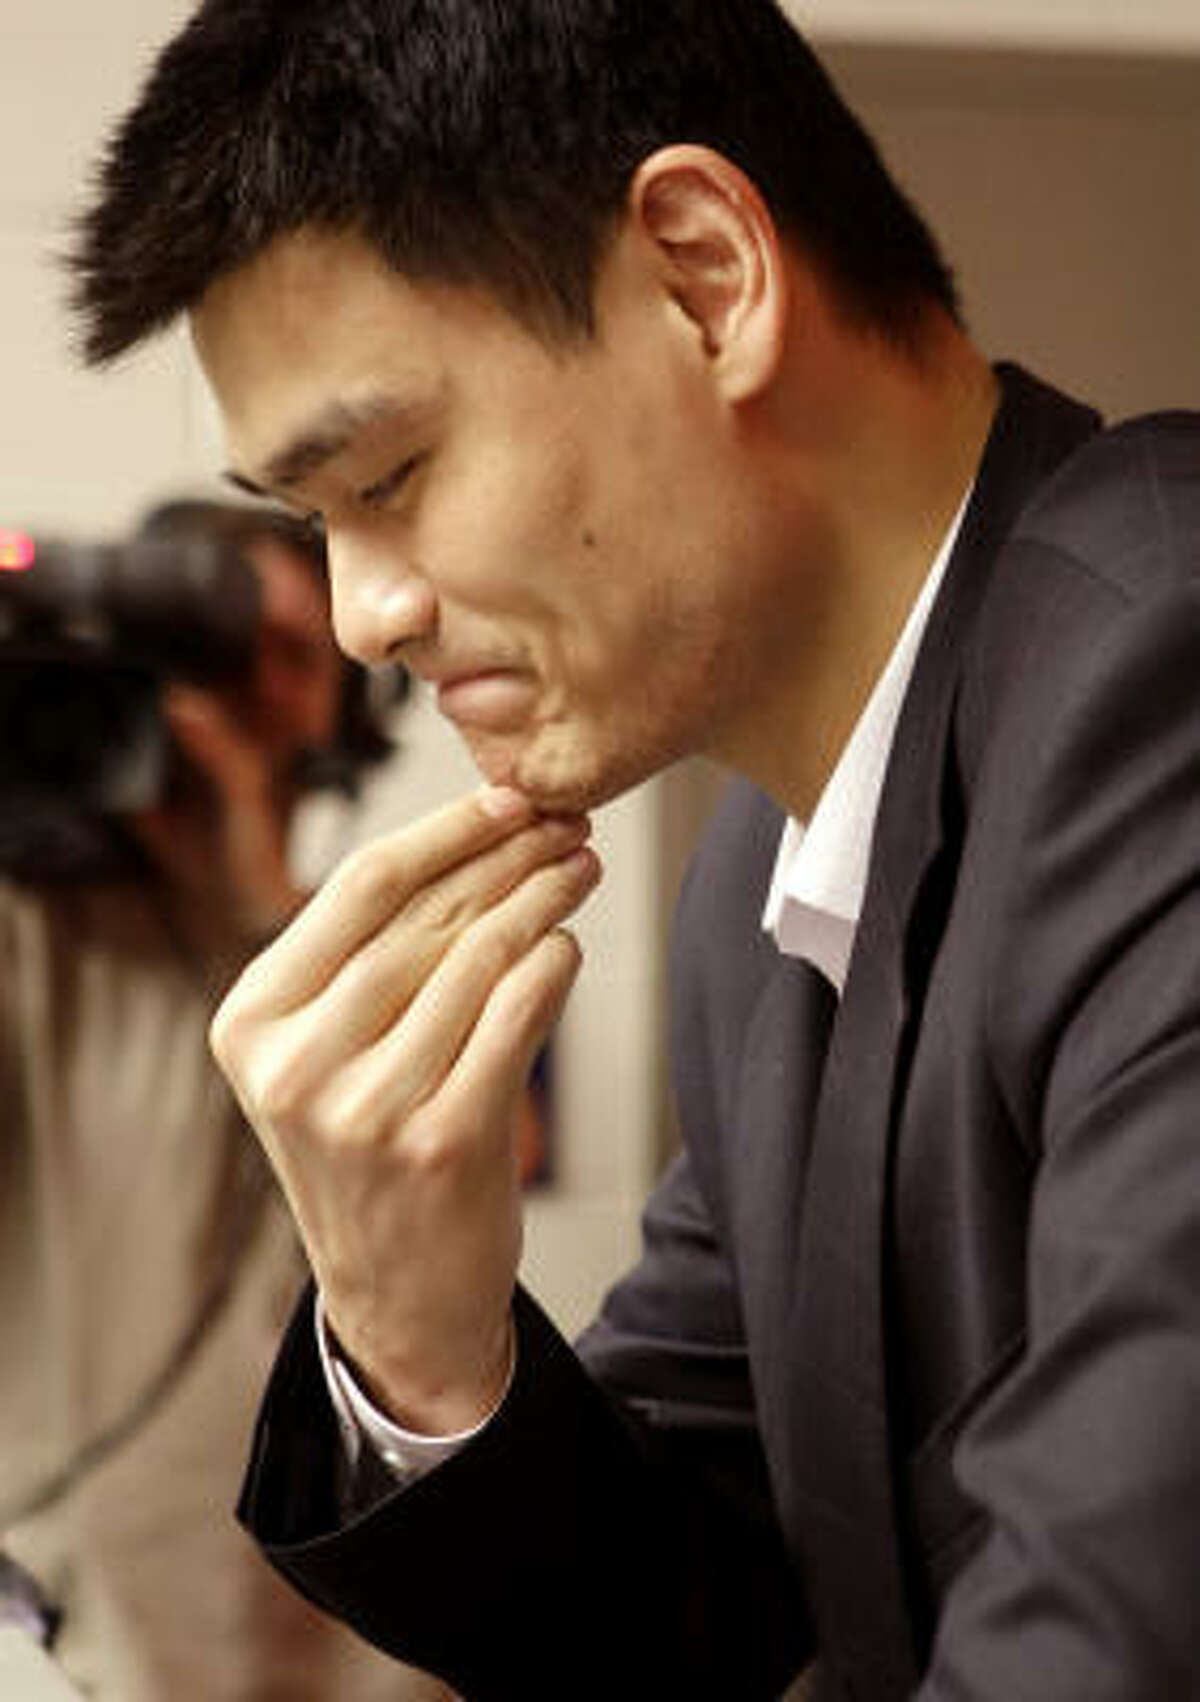 Houston Rockets center Yao Ming answers questions during a news conference after the announcement that Yao will be out for the season with a stress fracture to his left foot Tuesday, Feb. 26, 2008, in Houston.